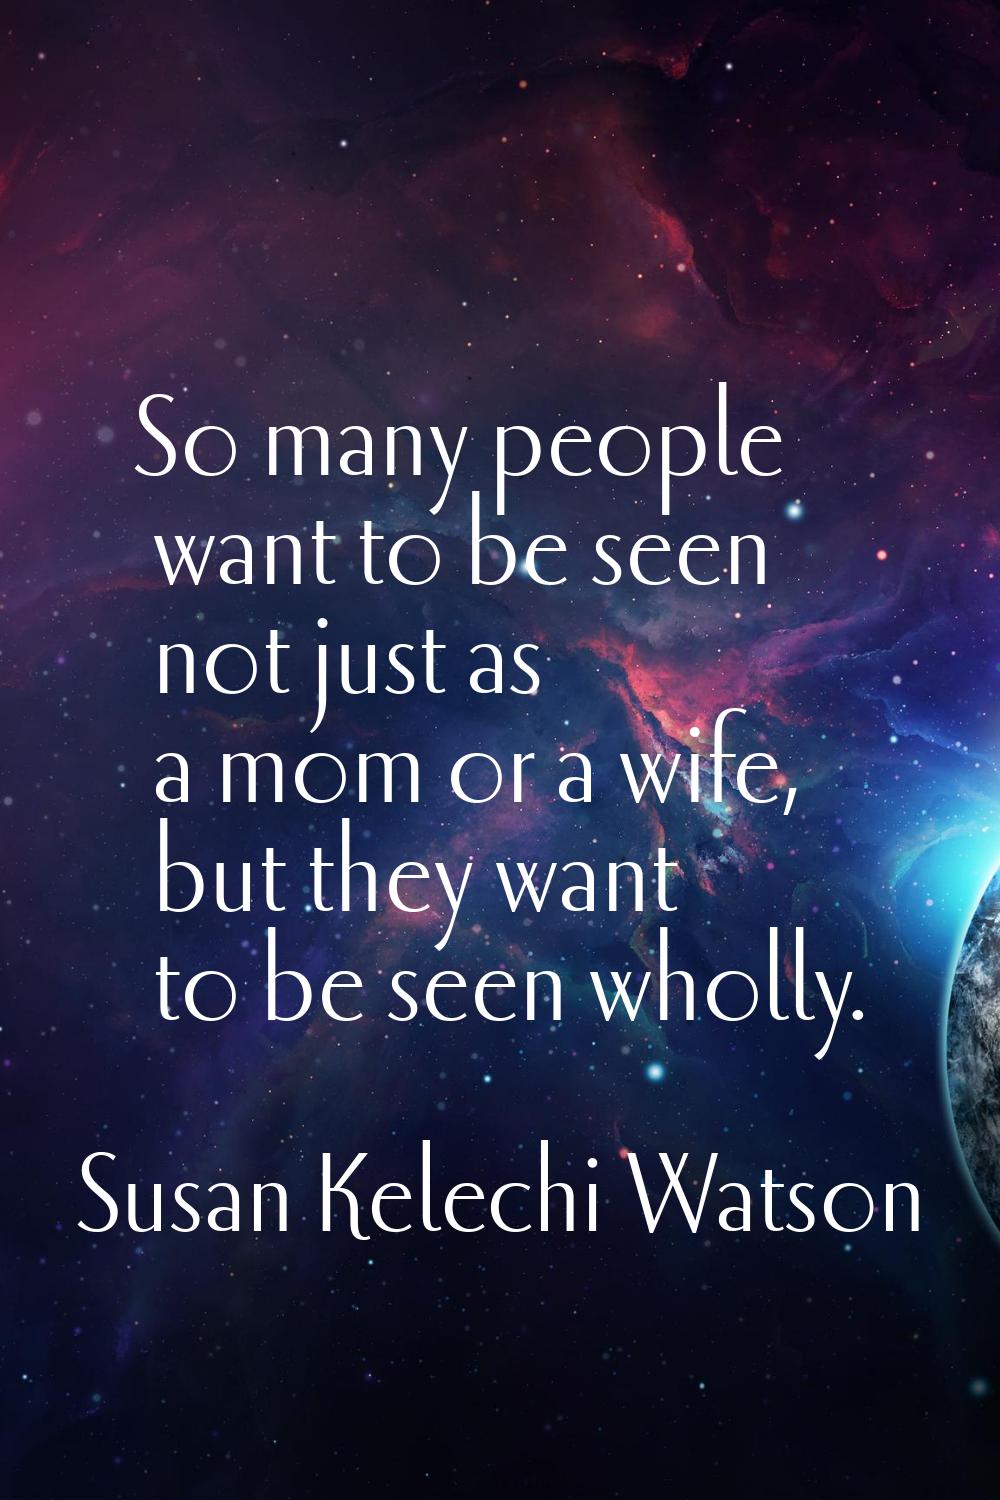 So many people want to be seen not just as a mom or a wife, but they want to be seen wholly.